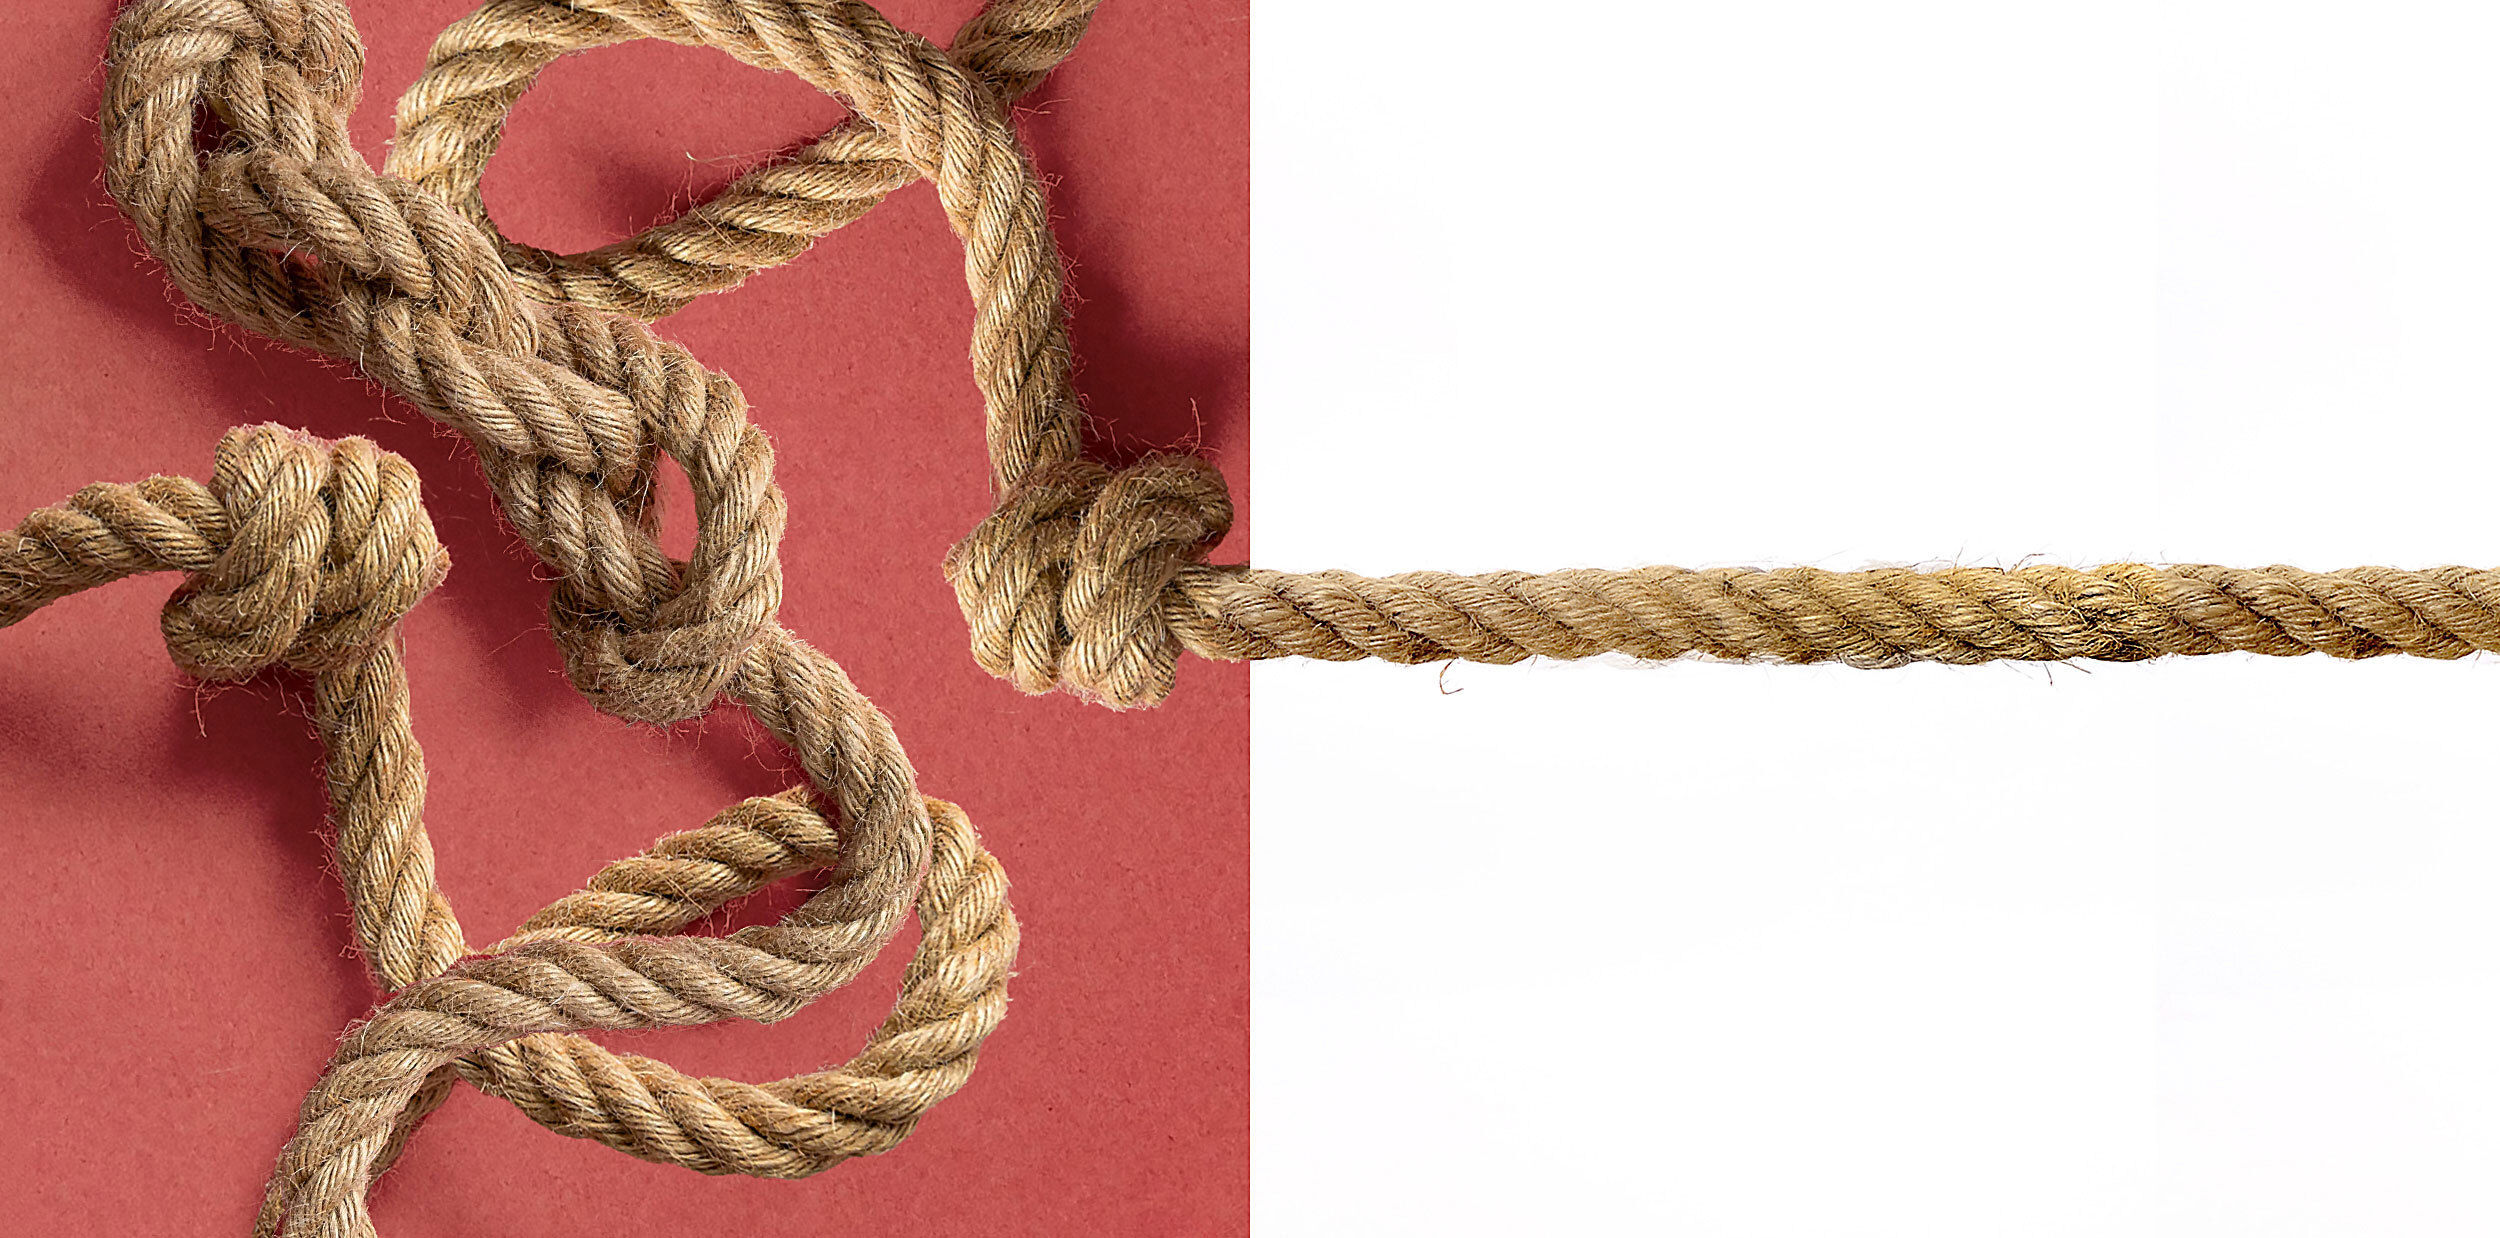 A visual representation of simplifying the complex. A tangled rope adjacent to a rope free of knots.